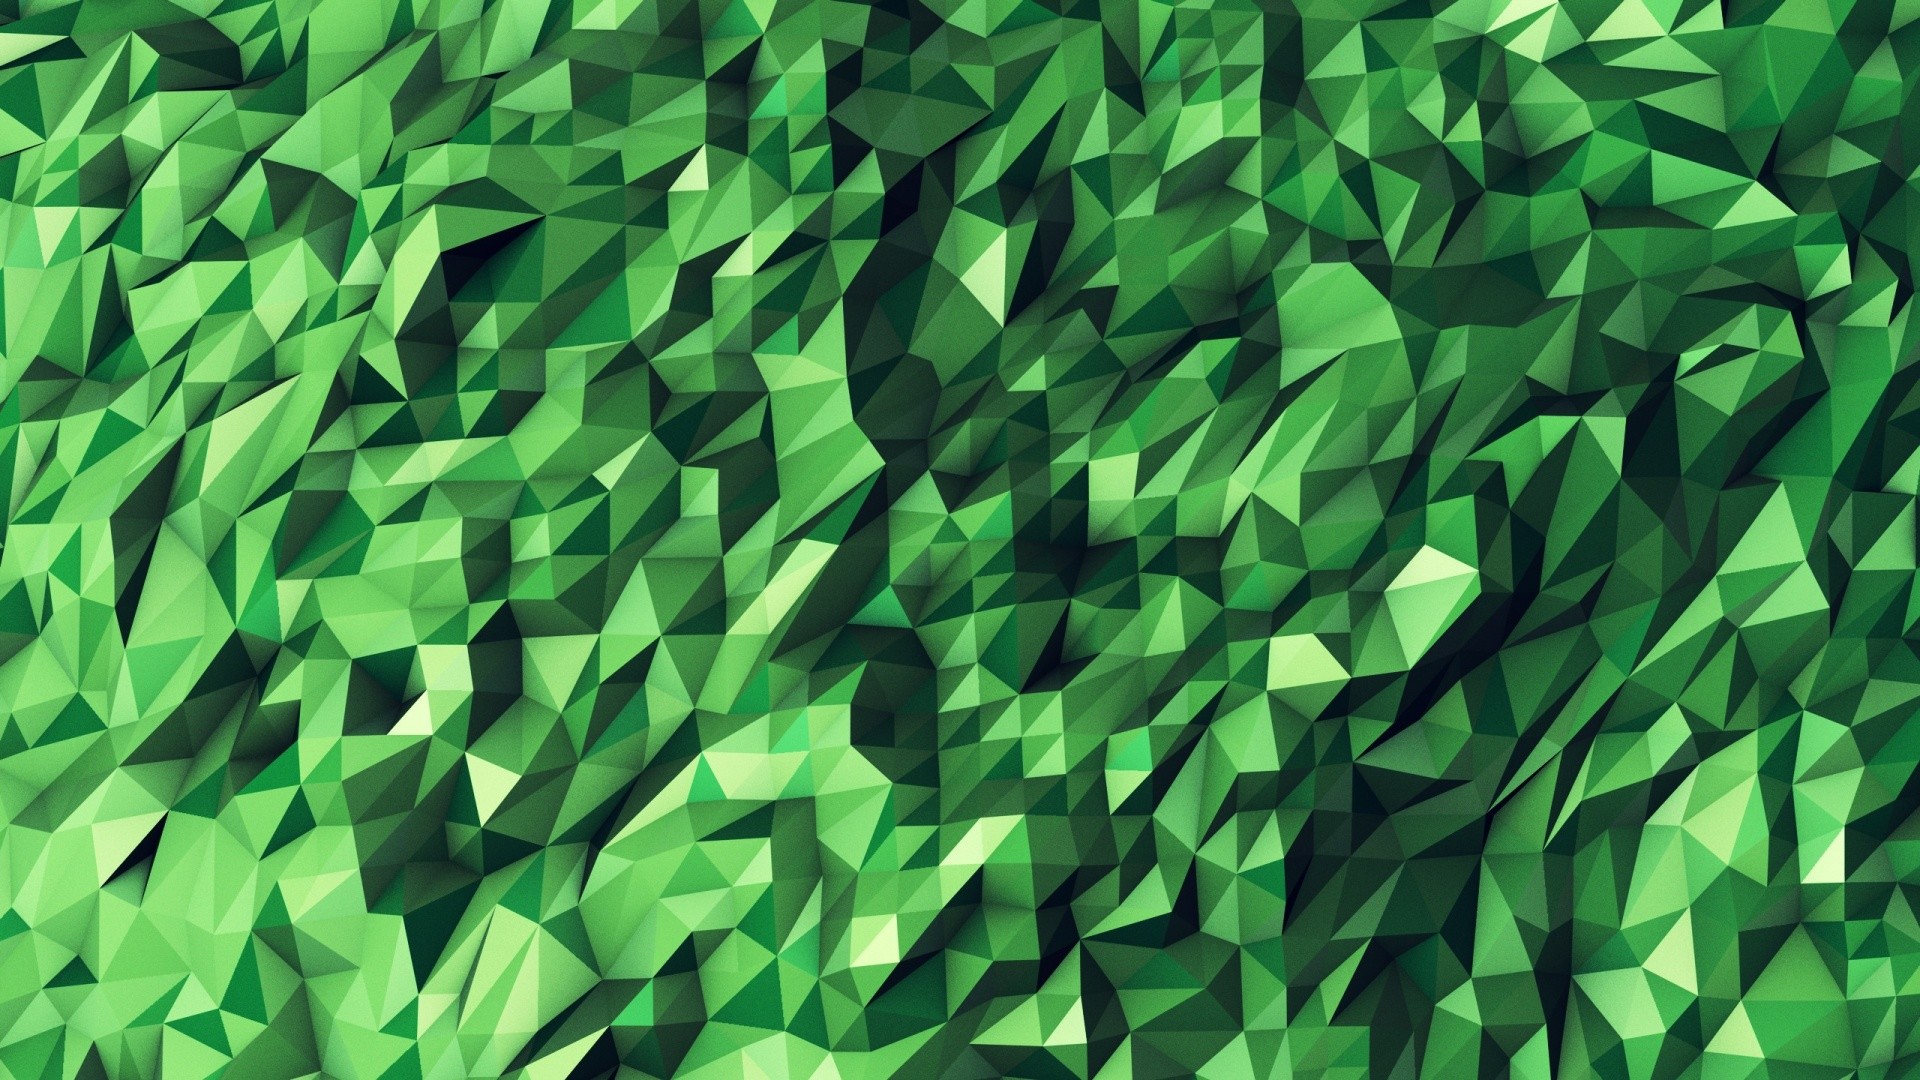 Green Abstract Geometric Shapes desktop PC and